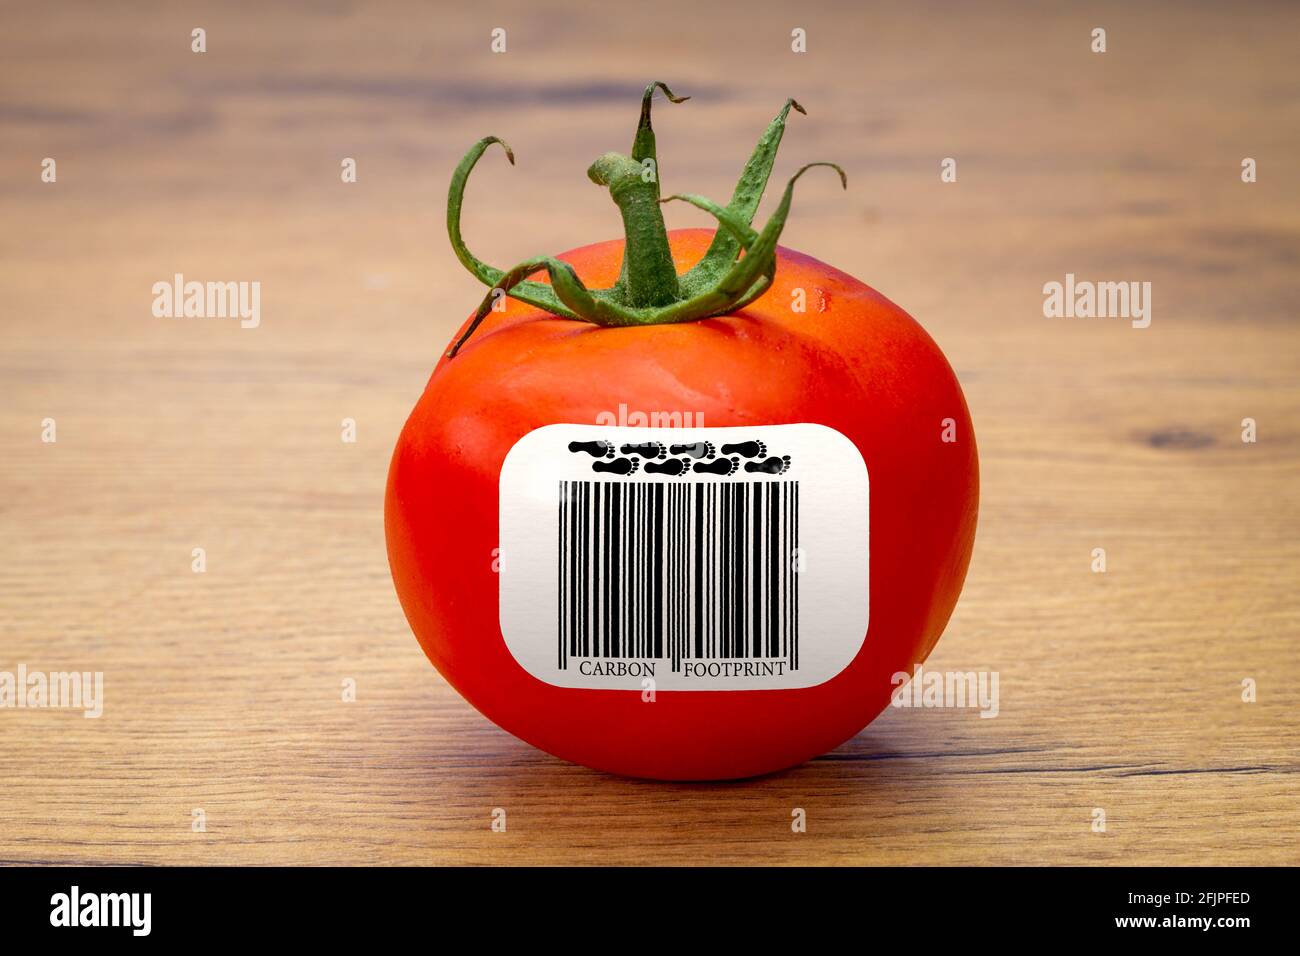 Carbon Footprint barcode label on Tomato, environmental impact sustainability label on food Stock Photo